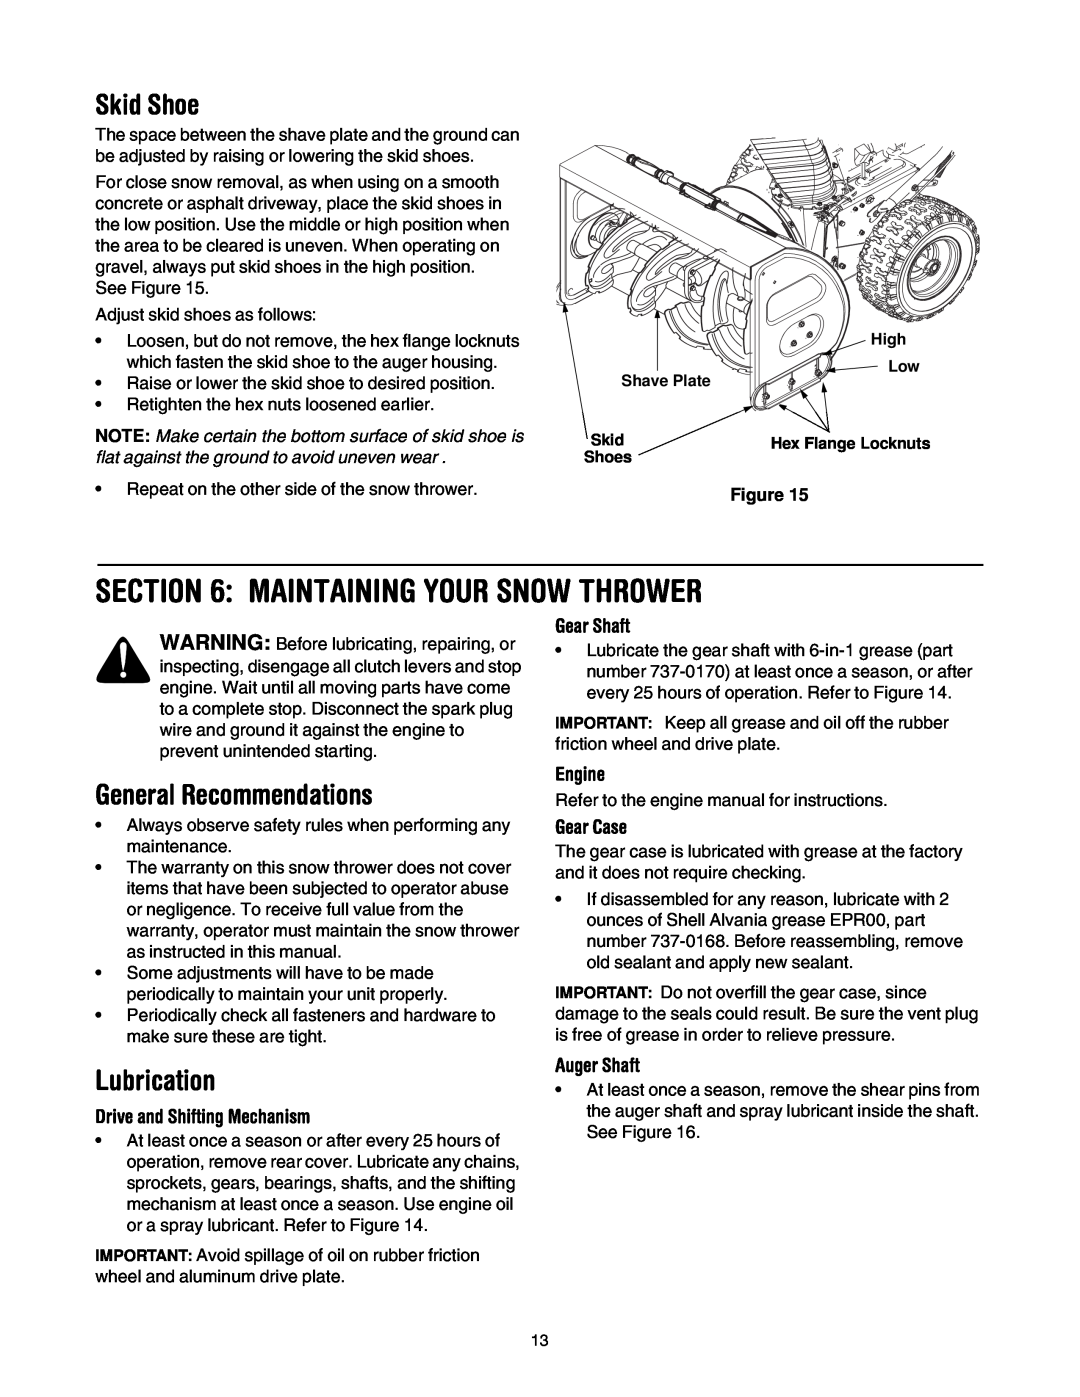 MTD OGST-3106 manual Maintaining Your Snow Thrower, Skid Shoe, General Recommendations, Lubrication 